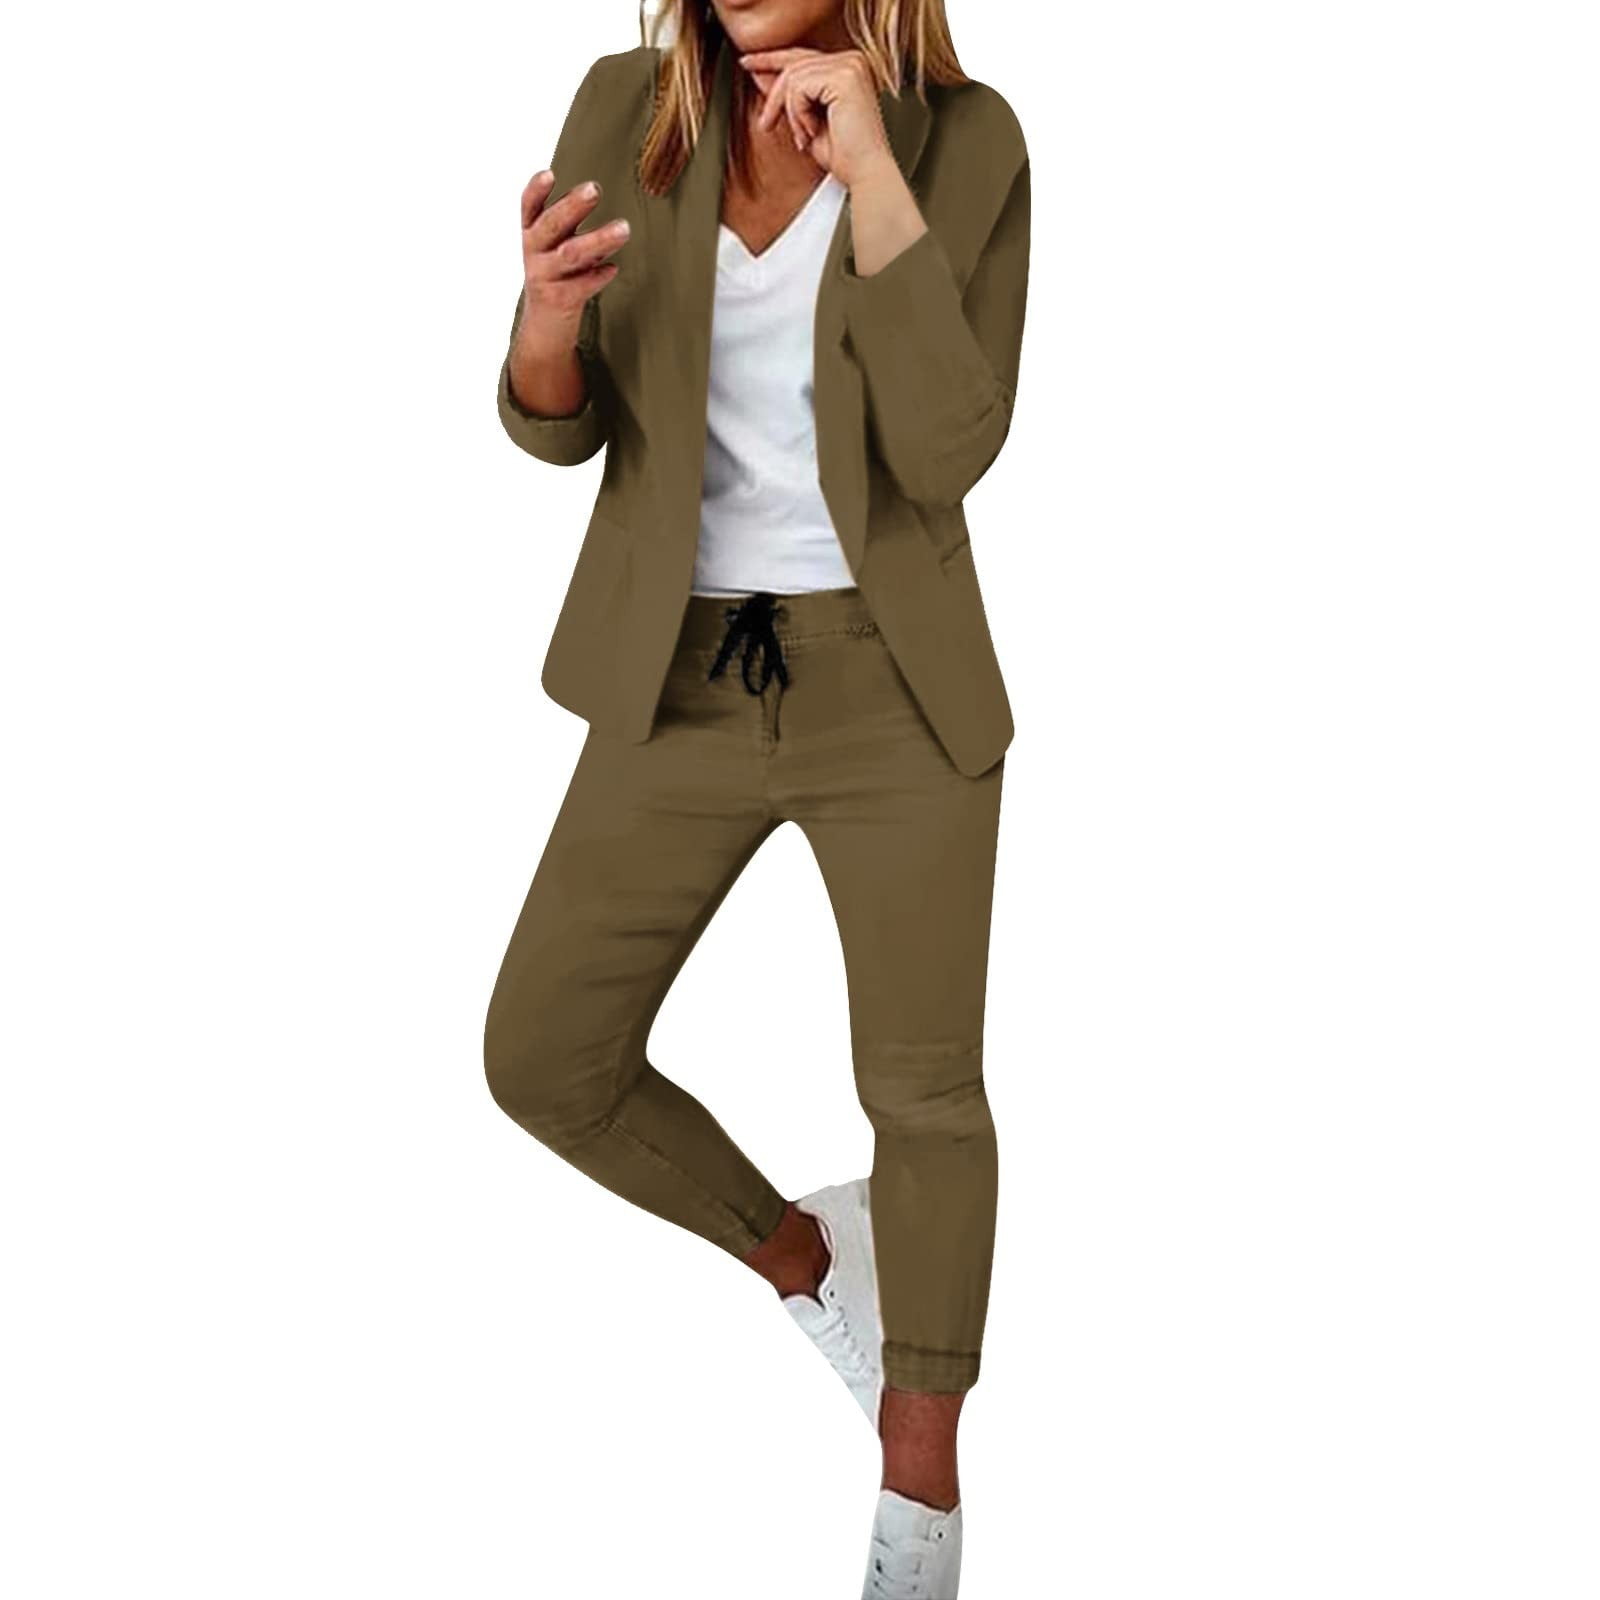 REORIAFEE Blazer Sets Women Outfits Date Night Outfit Women's Long Sleeve  Suit Pants Casual Elegant Business Suit Coffee L